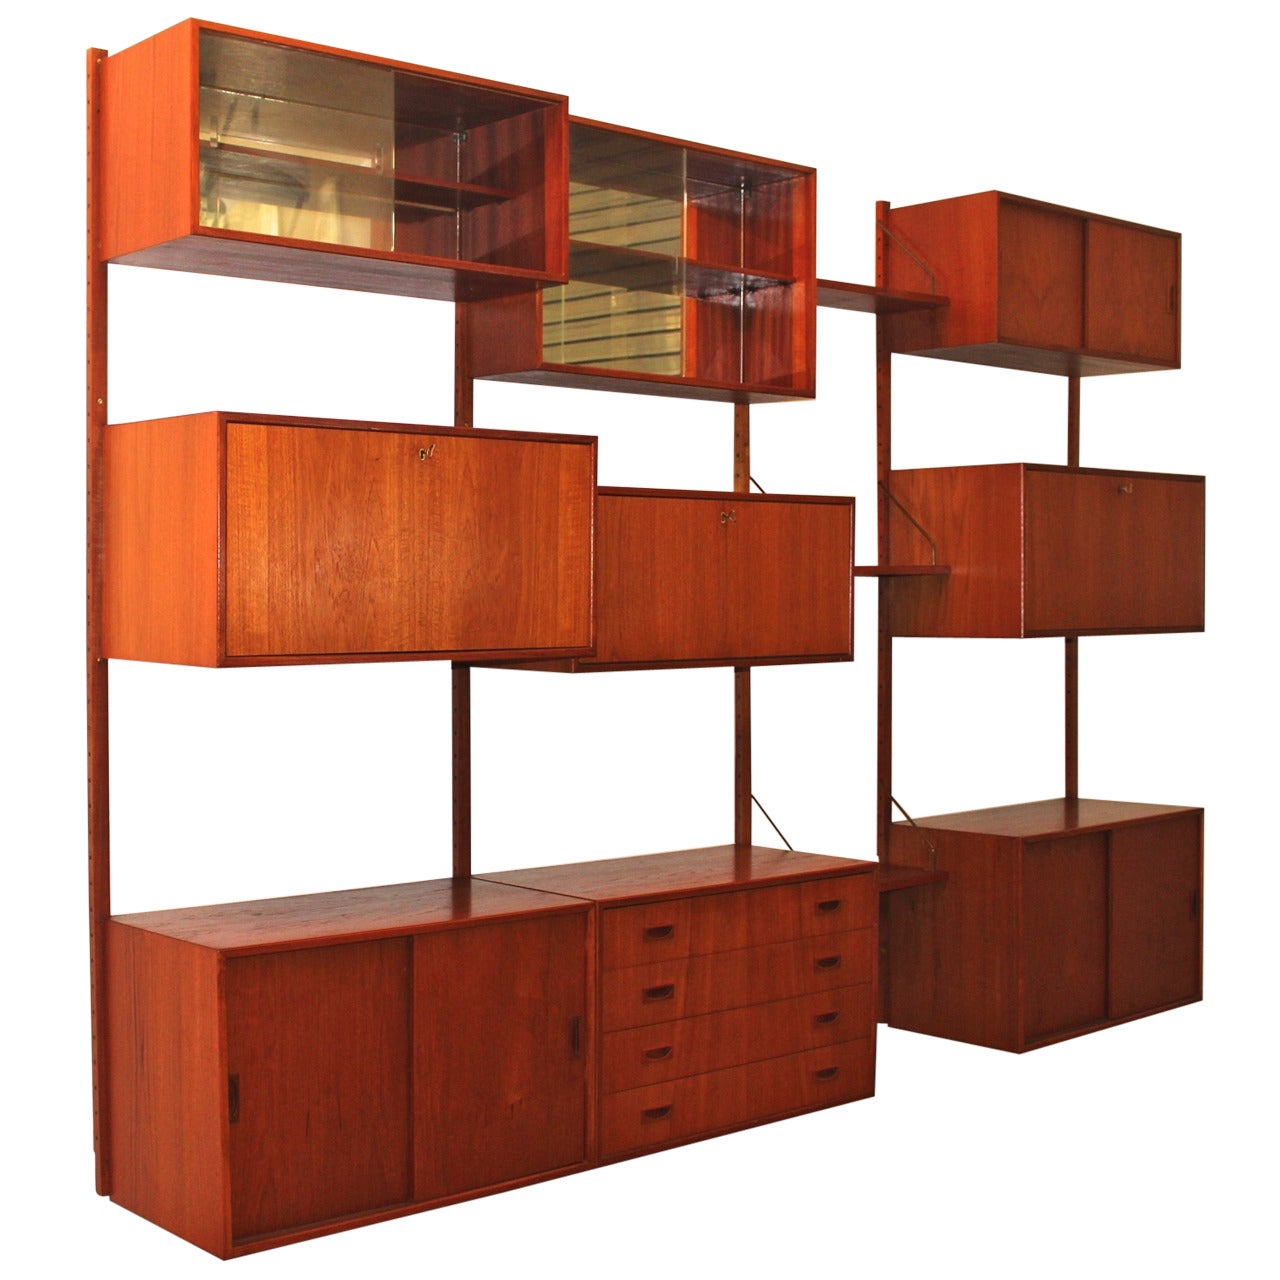 Case Pieces and Storage Cabinets Auctions